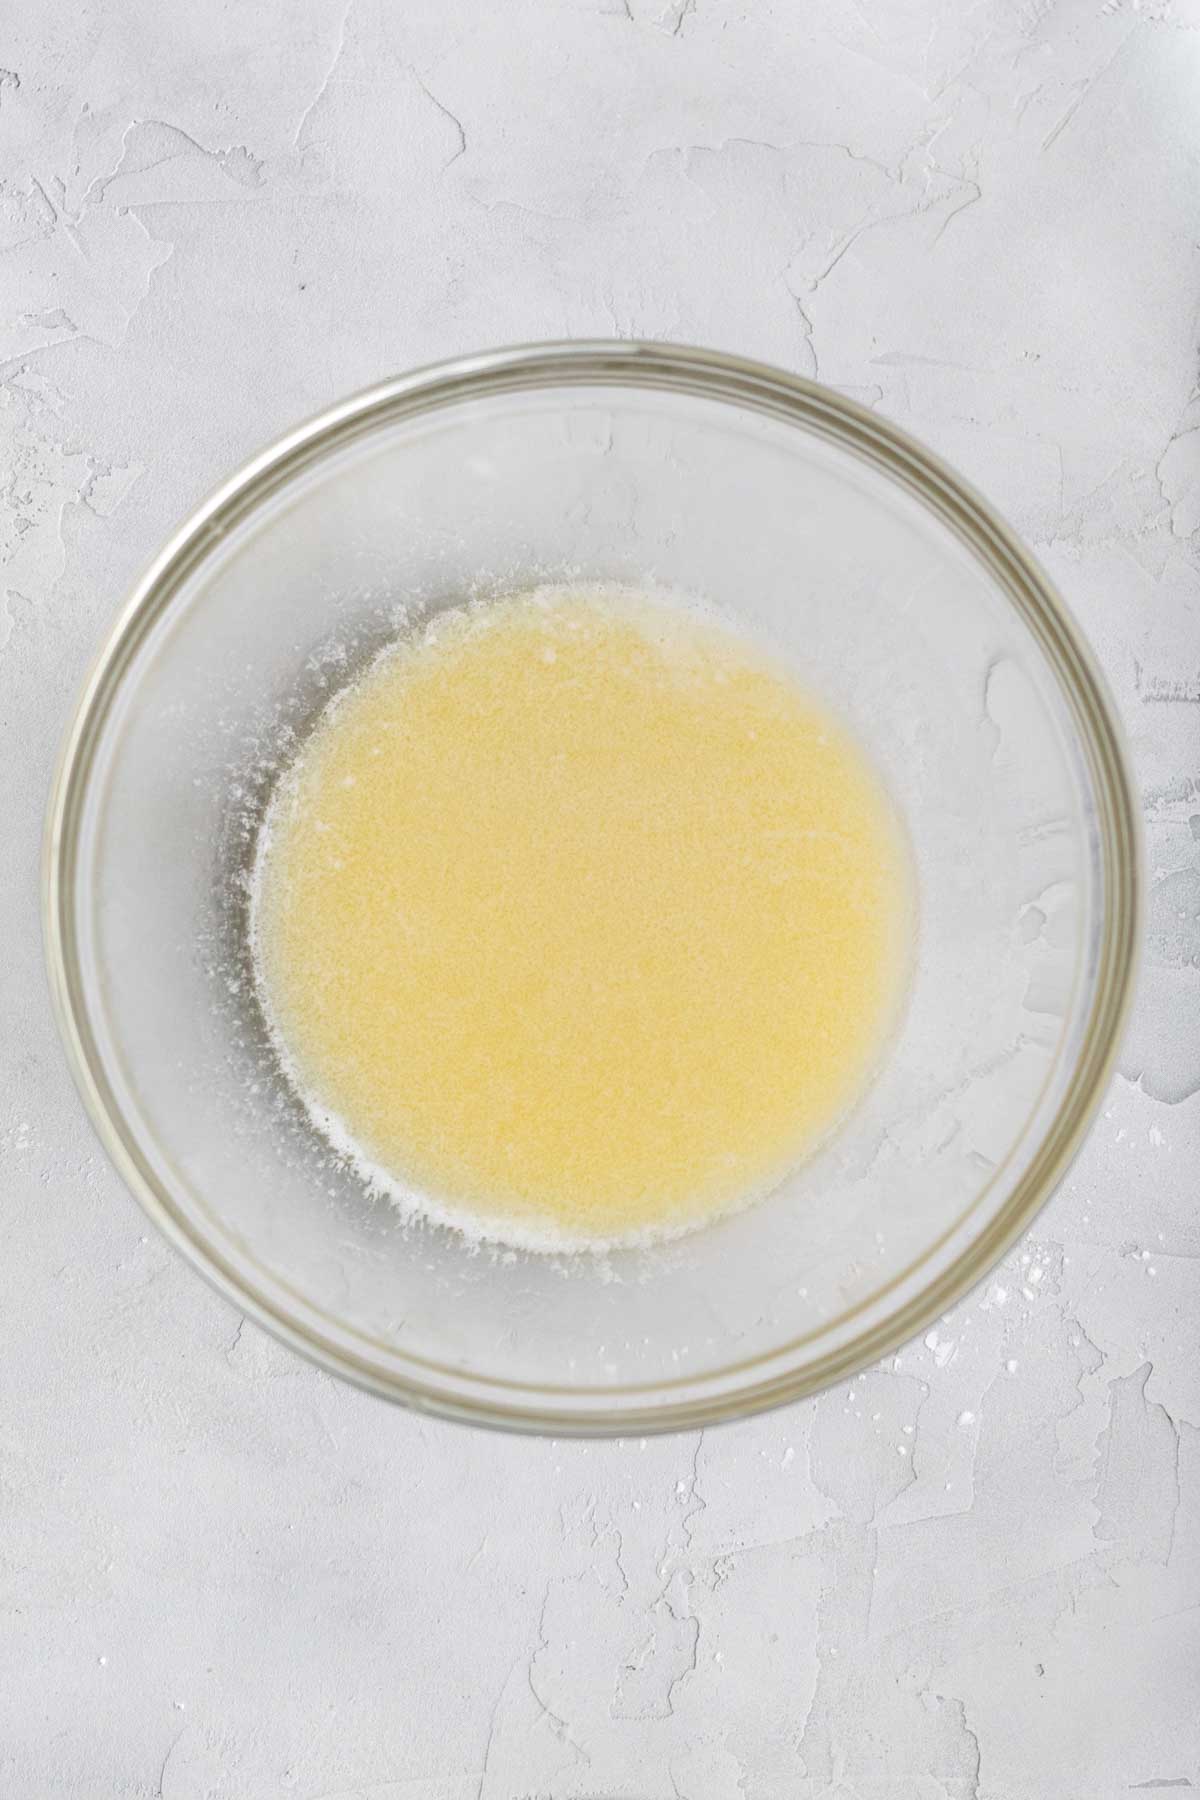 Melted butter in a glass bowl.